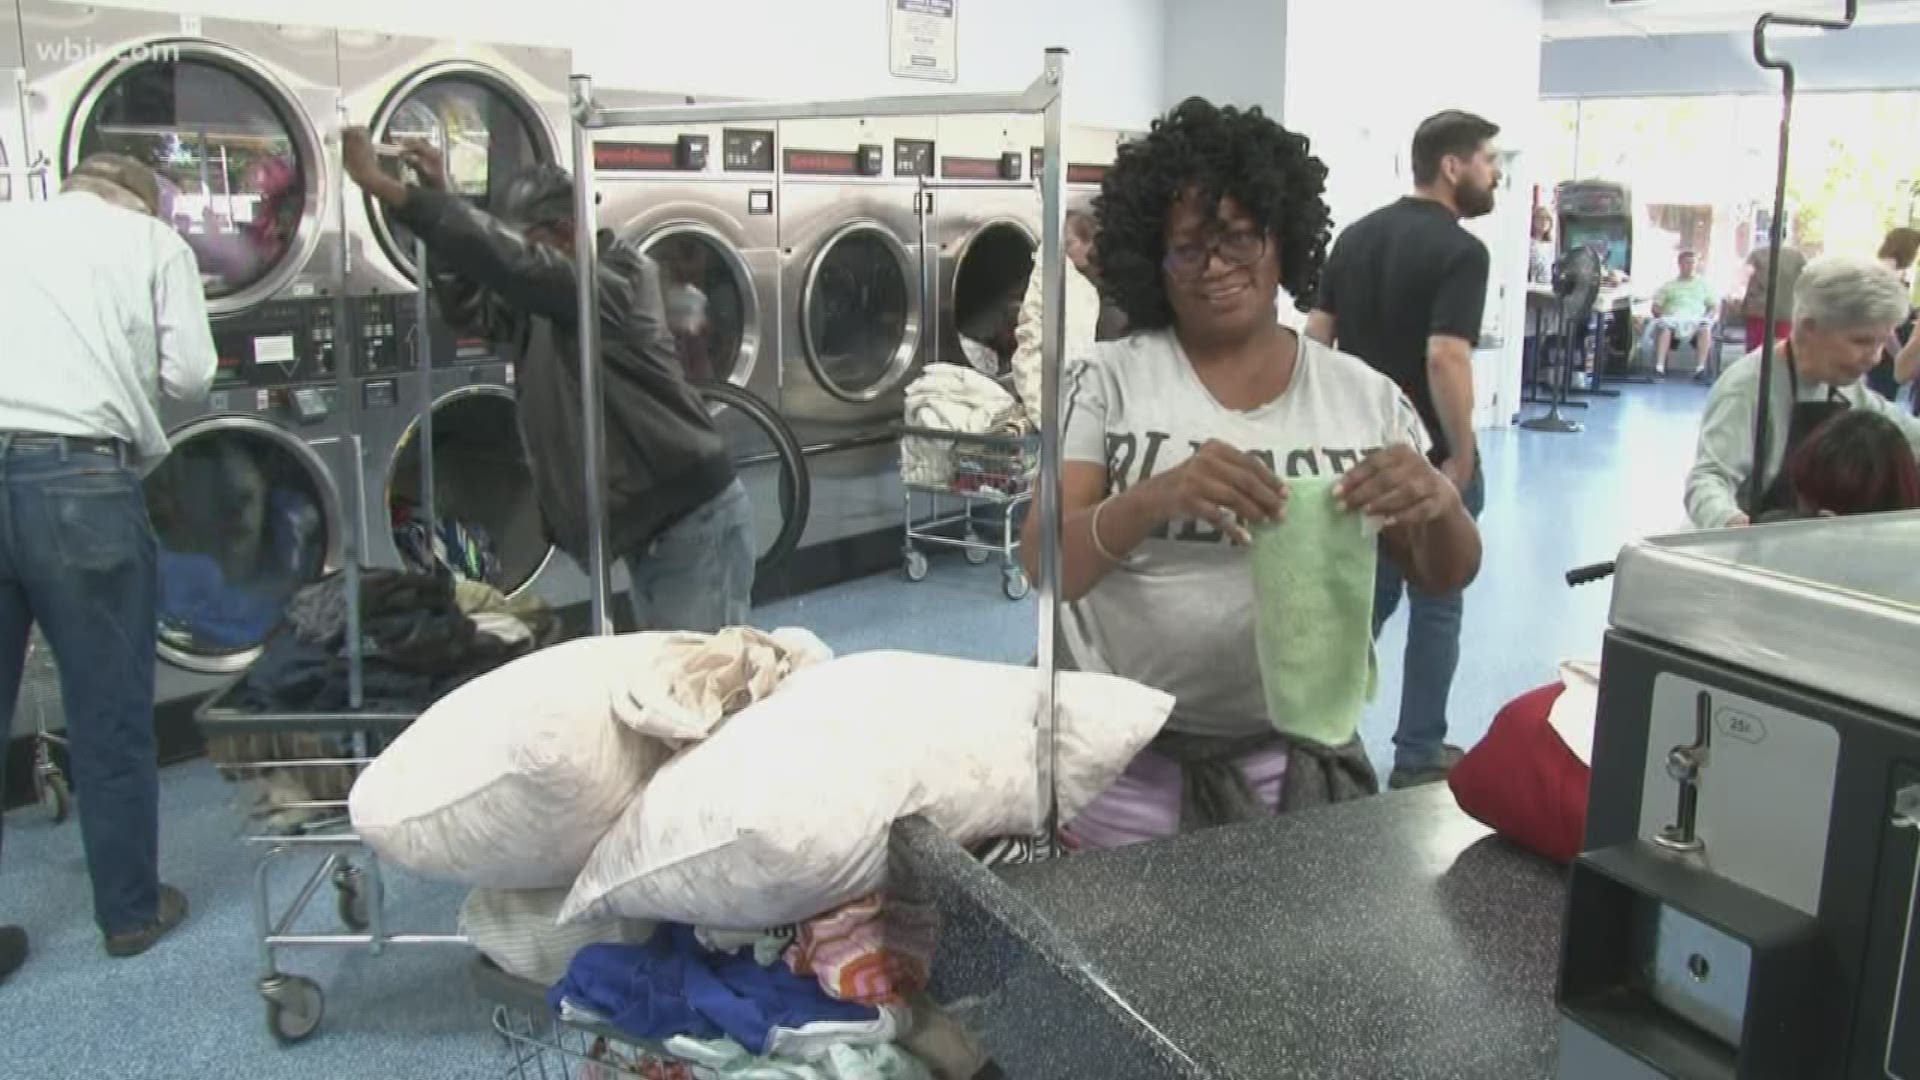 Dozens of families washed their laundry for free thanks to Laundry Love volunteers.